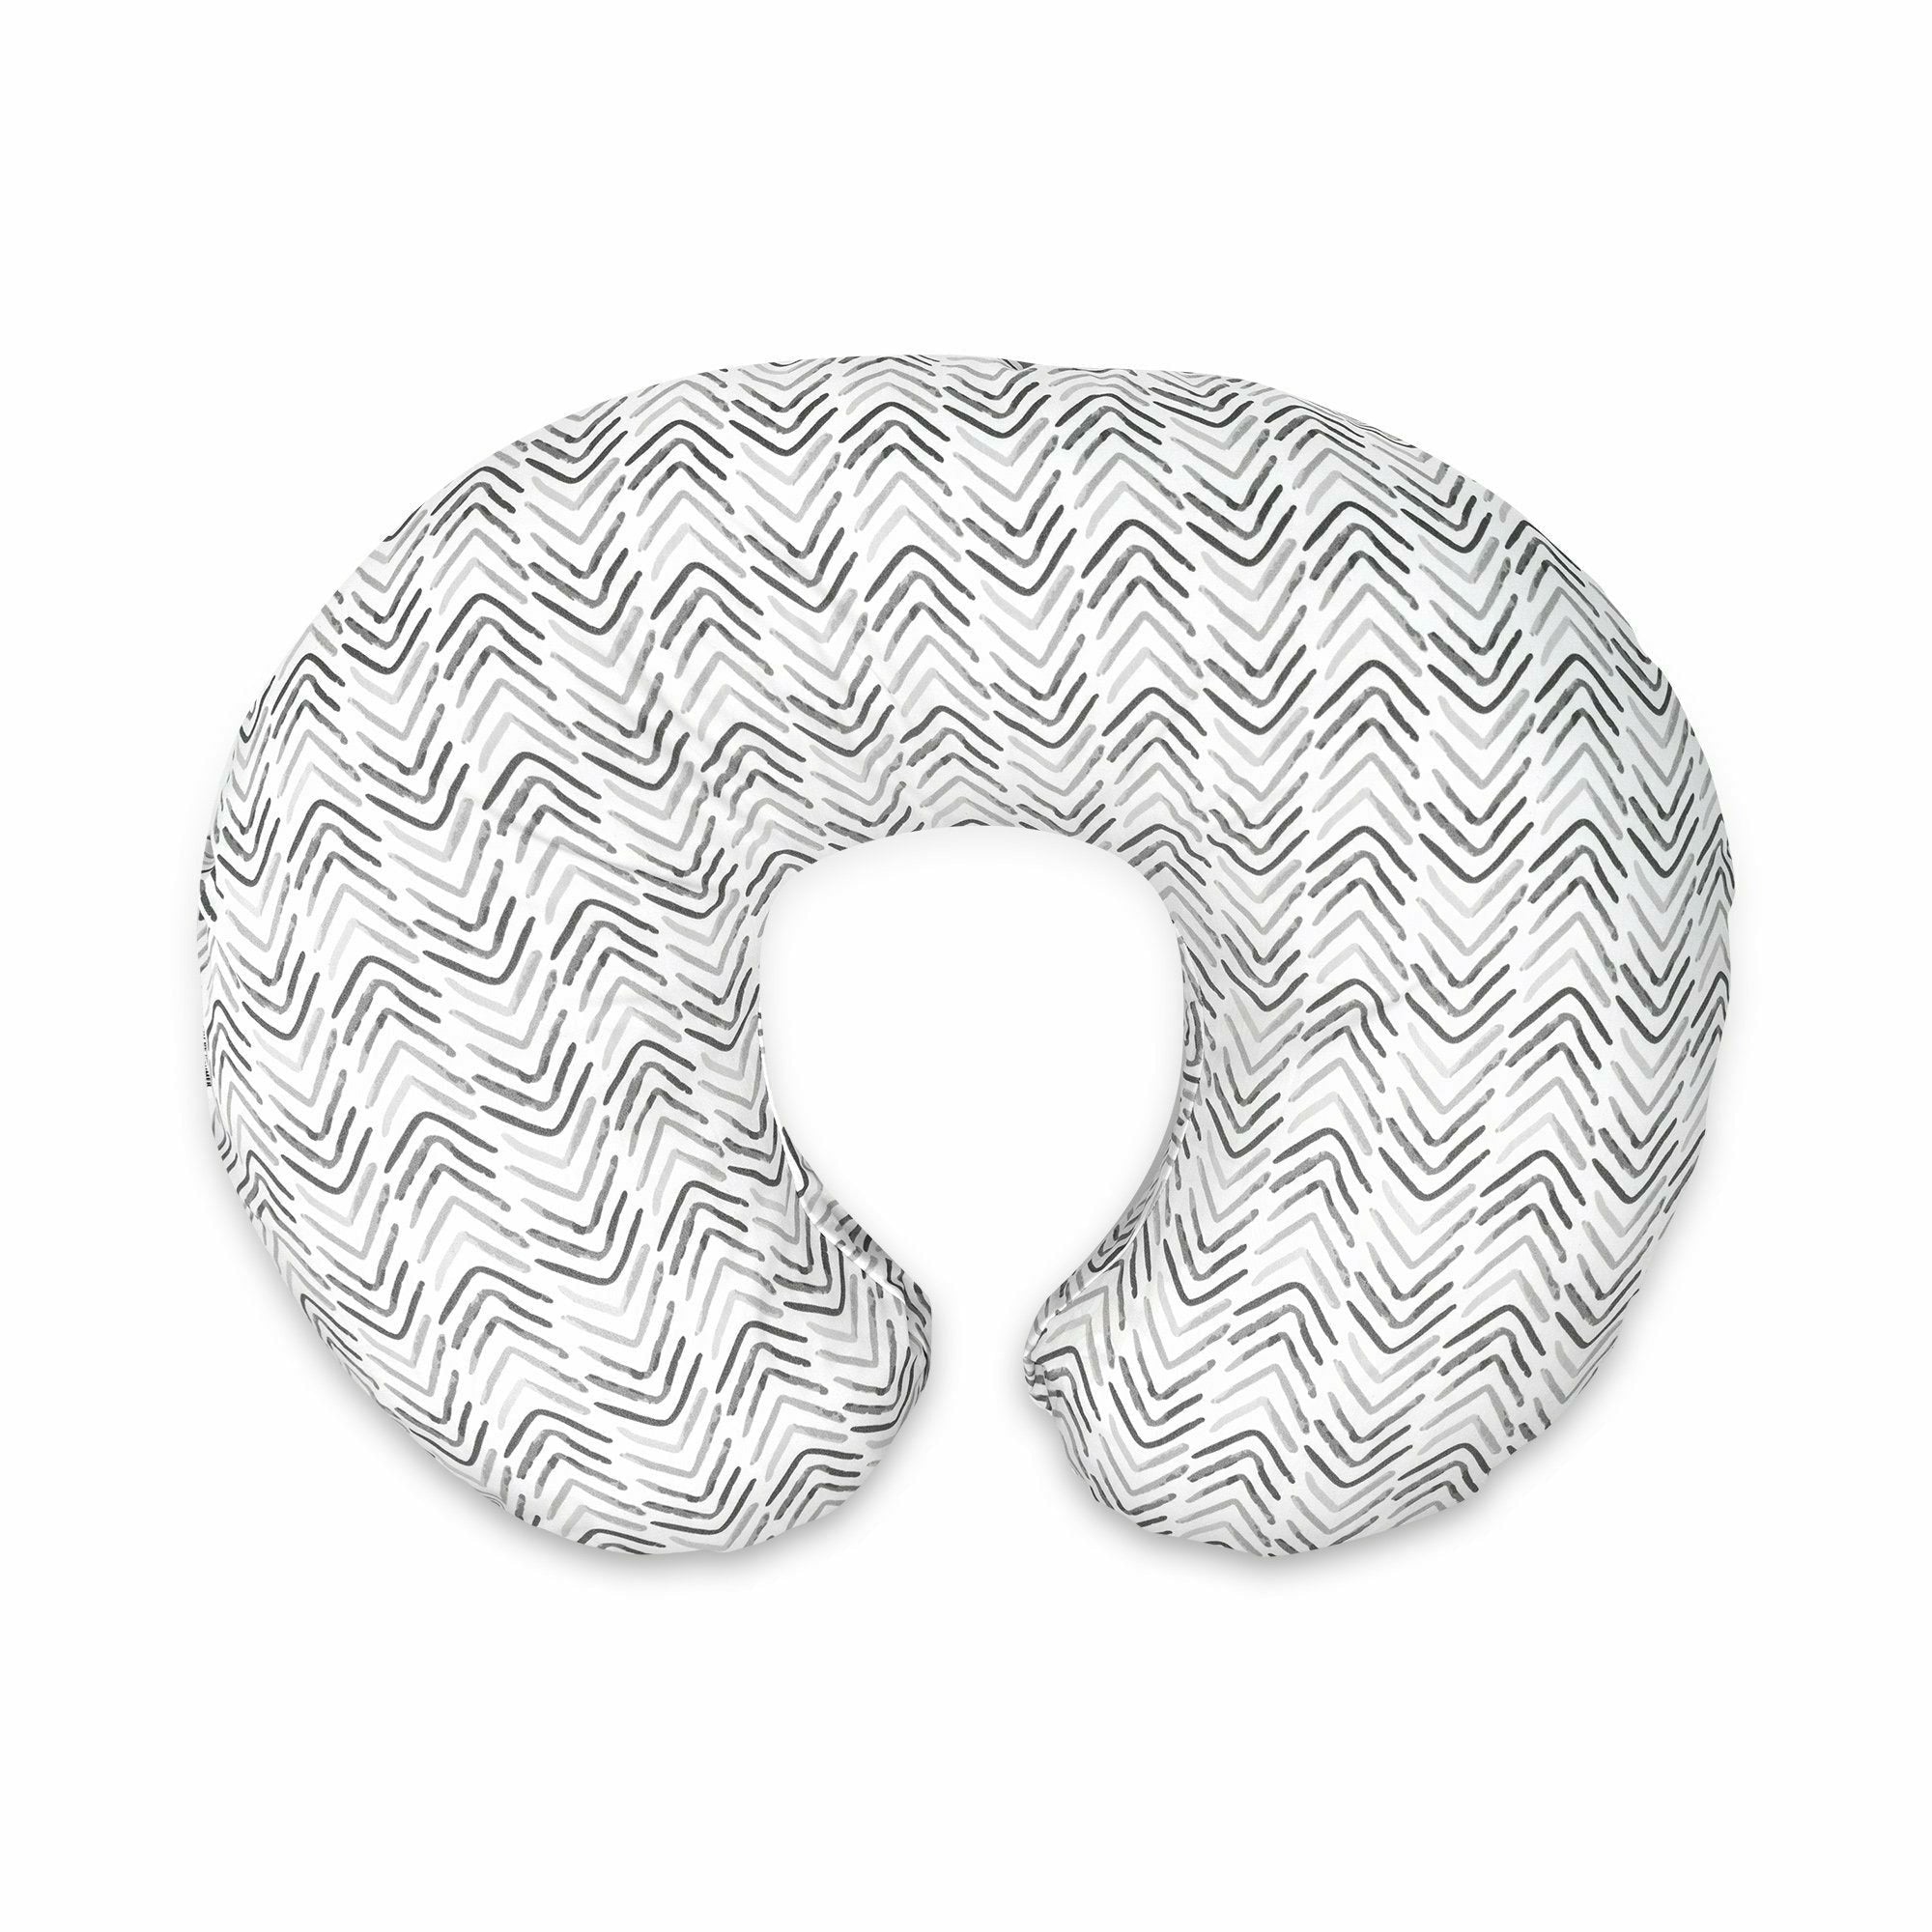 Baby support pillow – 👶 Serene Parents